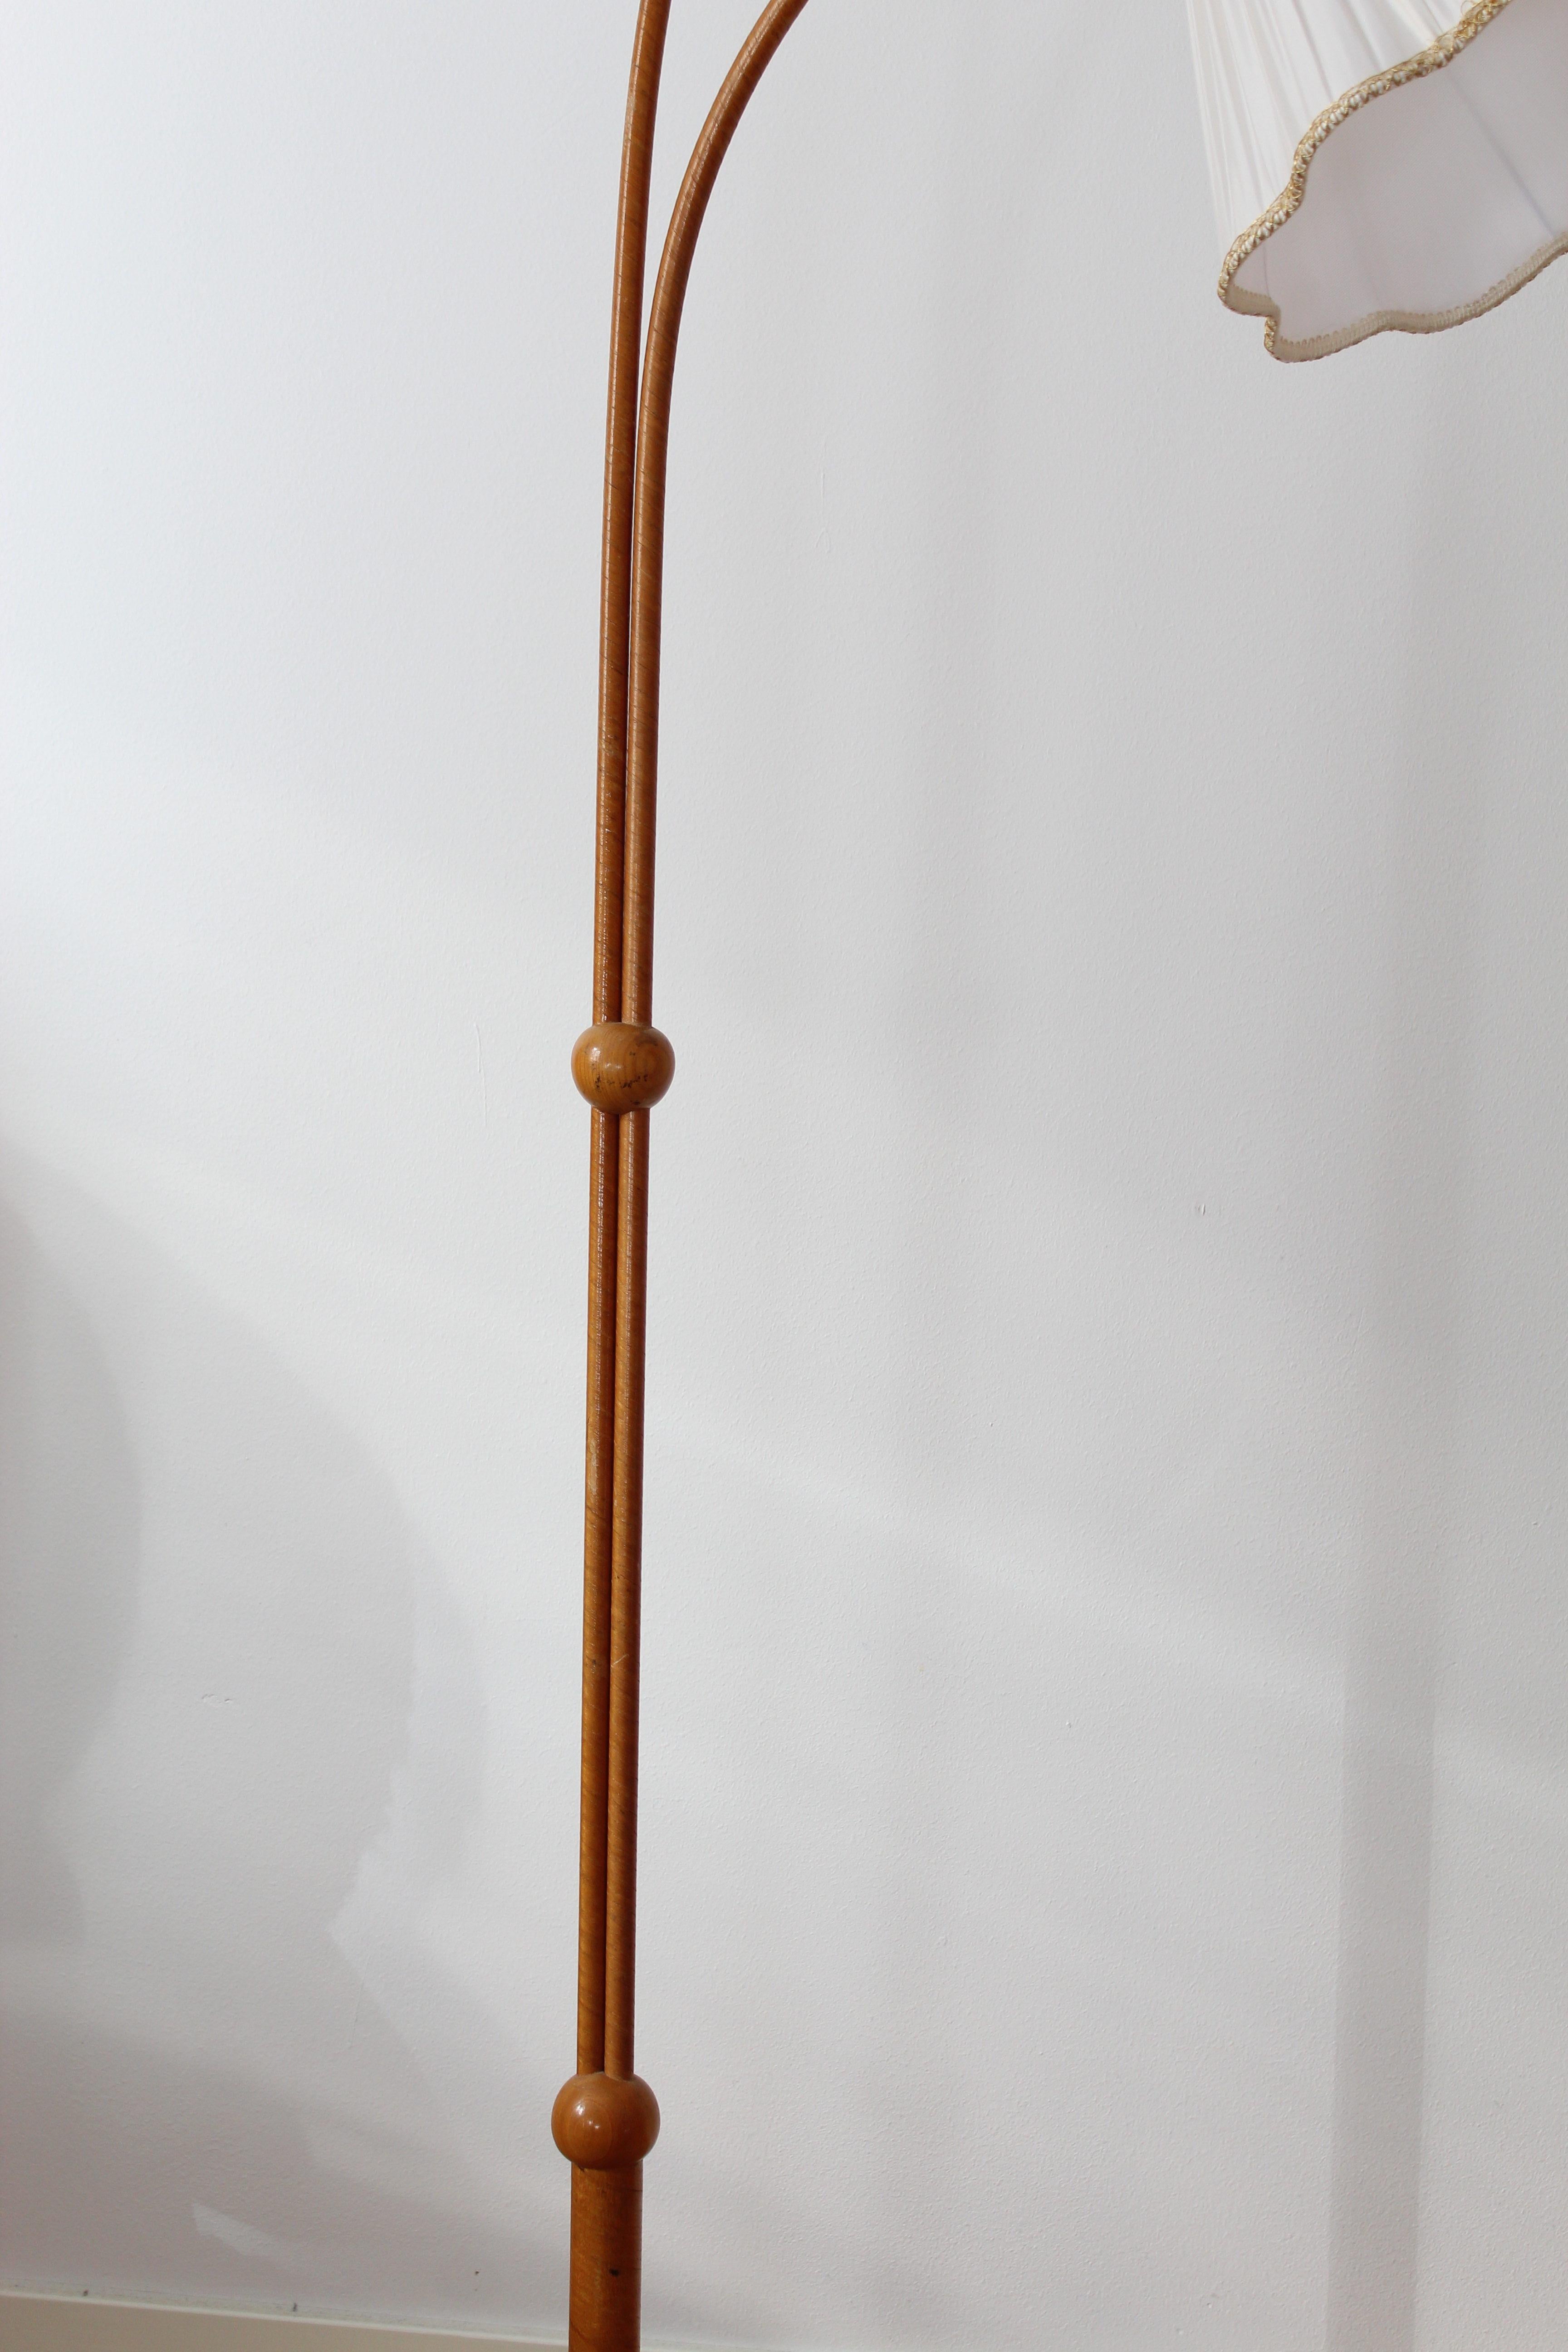 An organic three-armed floor lamp. Designed by an unknown Swedish modernist designer, 1930s. Possibly manufactured by Böhlmarks. Produced in, wood, fabric, and brass. 

Other designers working in the organic style include Jean Royere, Gio Ponti,